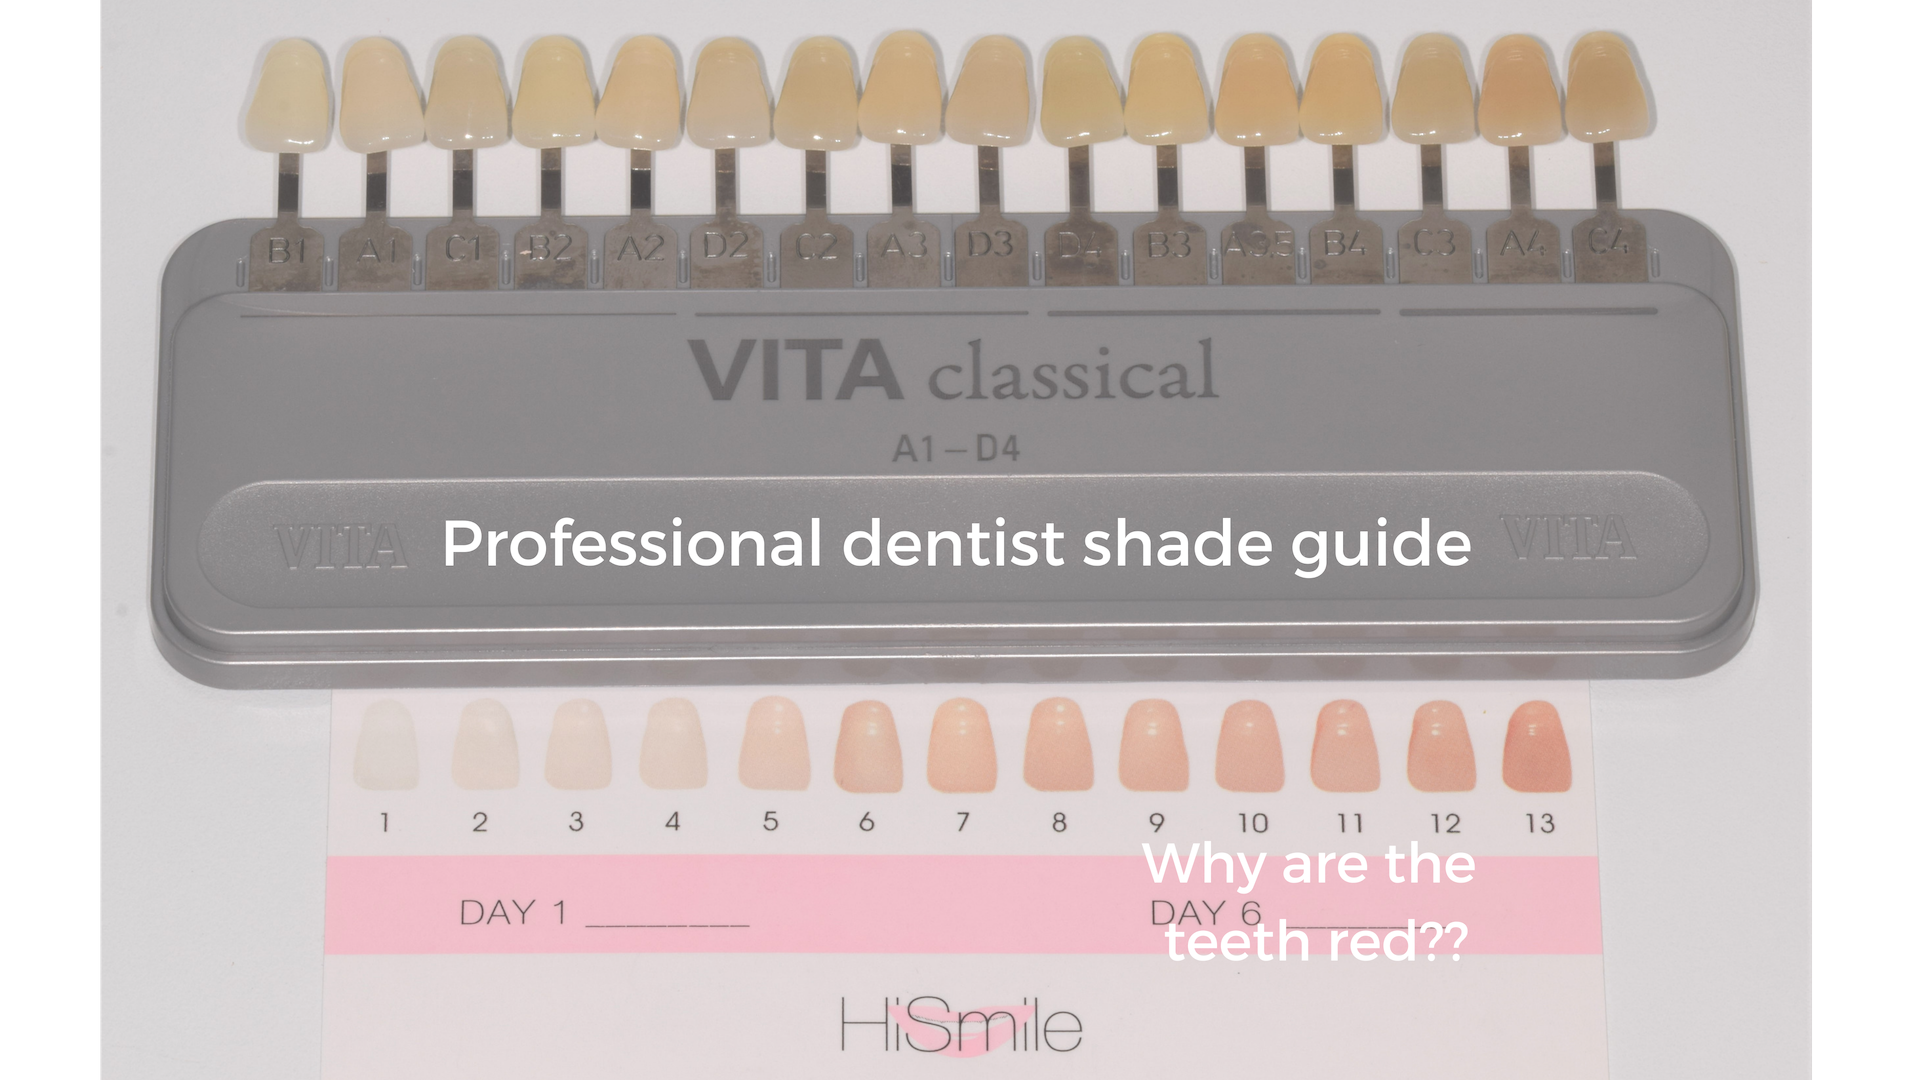 Red teeth in HiSmile's shade guide